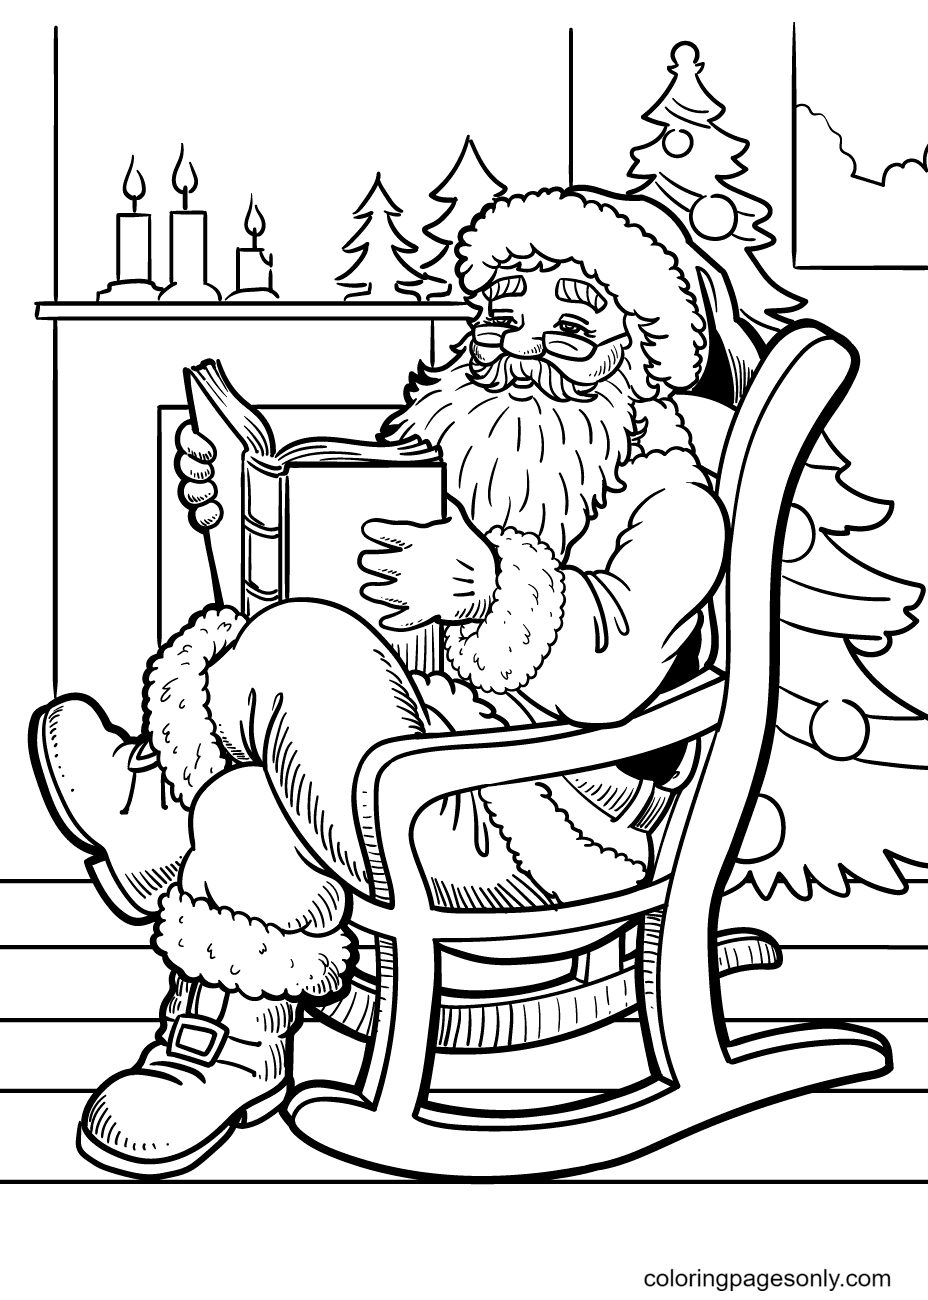 Santa Claus Sitting In The Rocking Chair Relax Coloring Pages